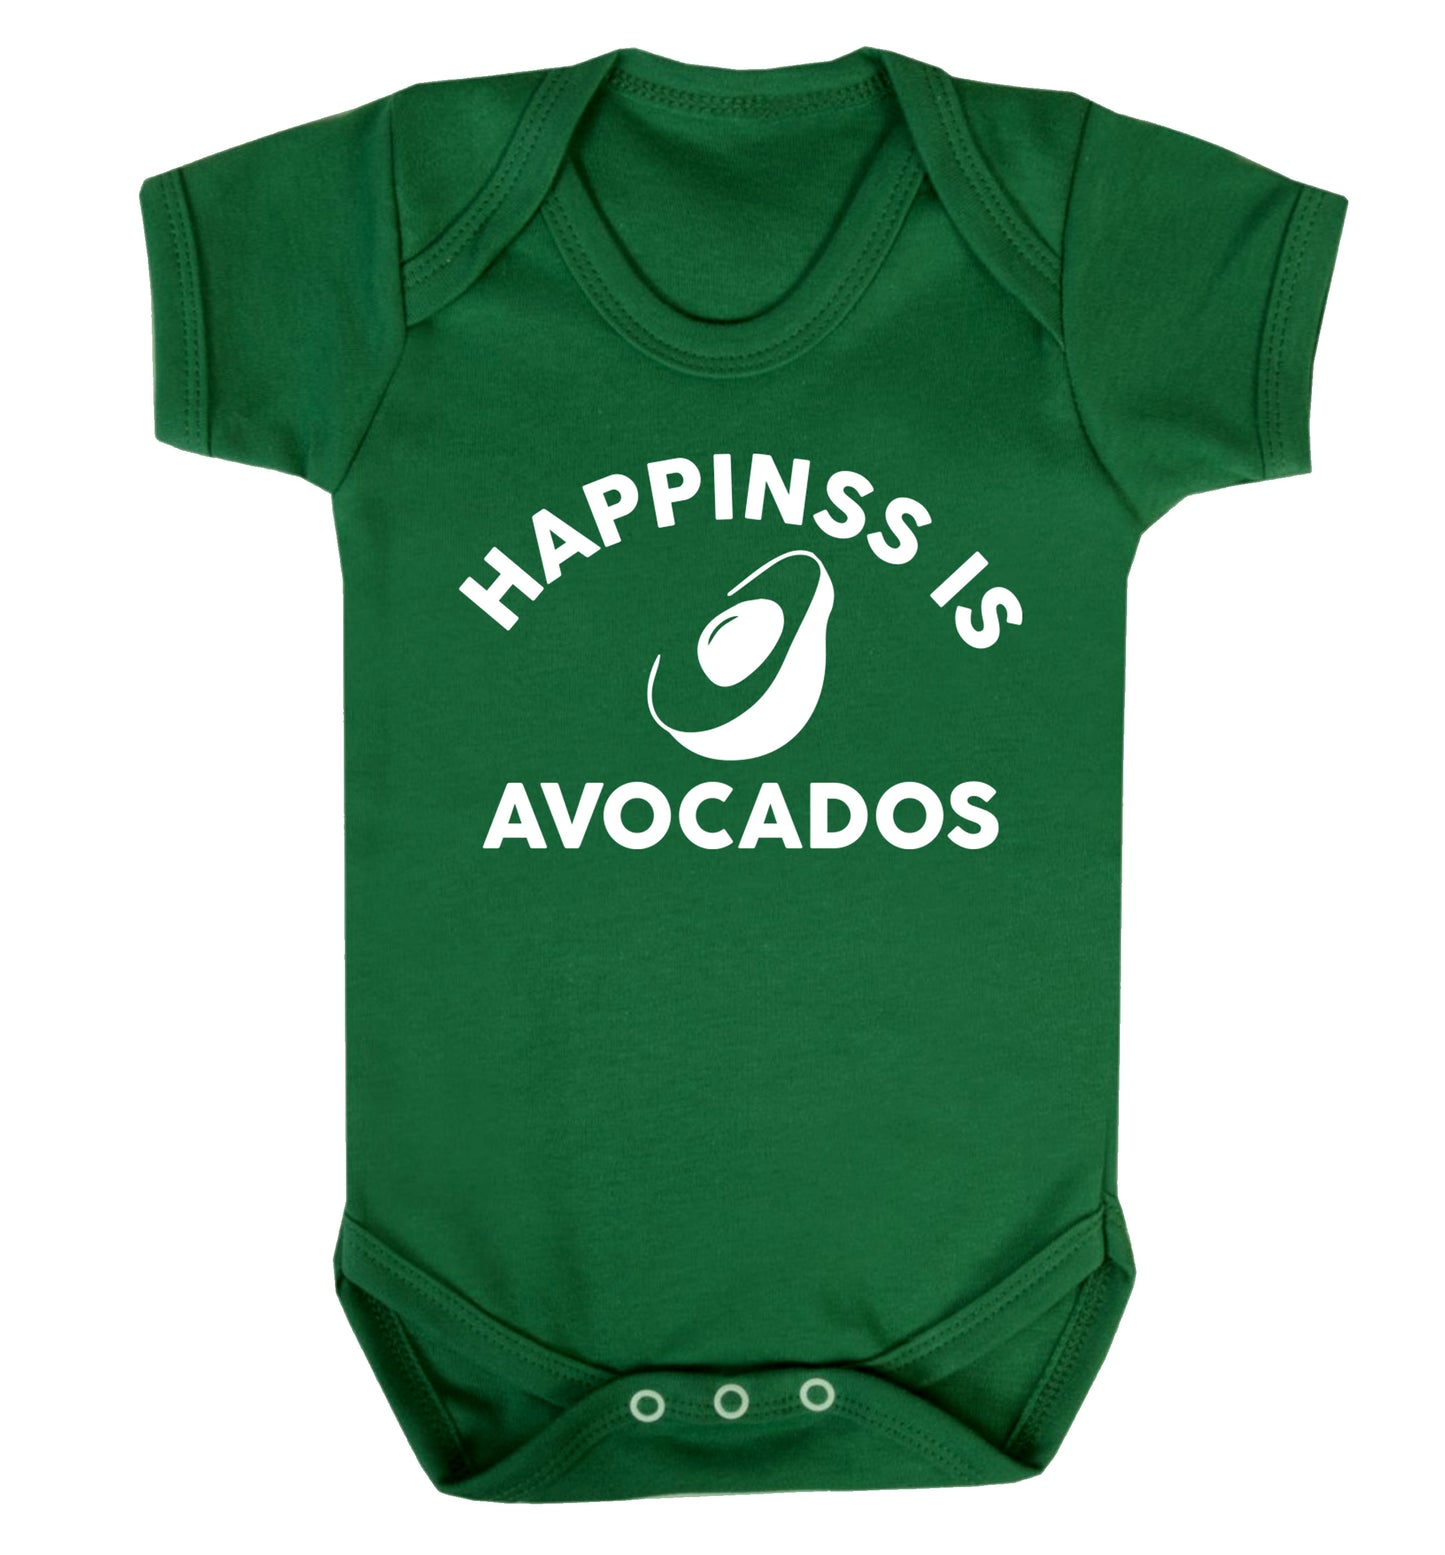 Happiness is avocados Baby Vest green 18-24 months